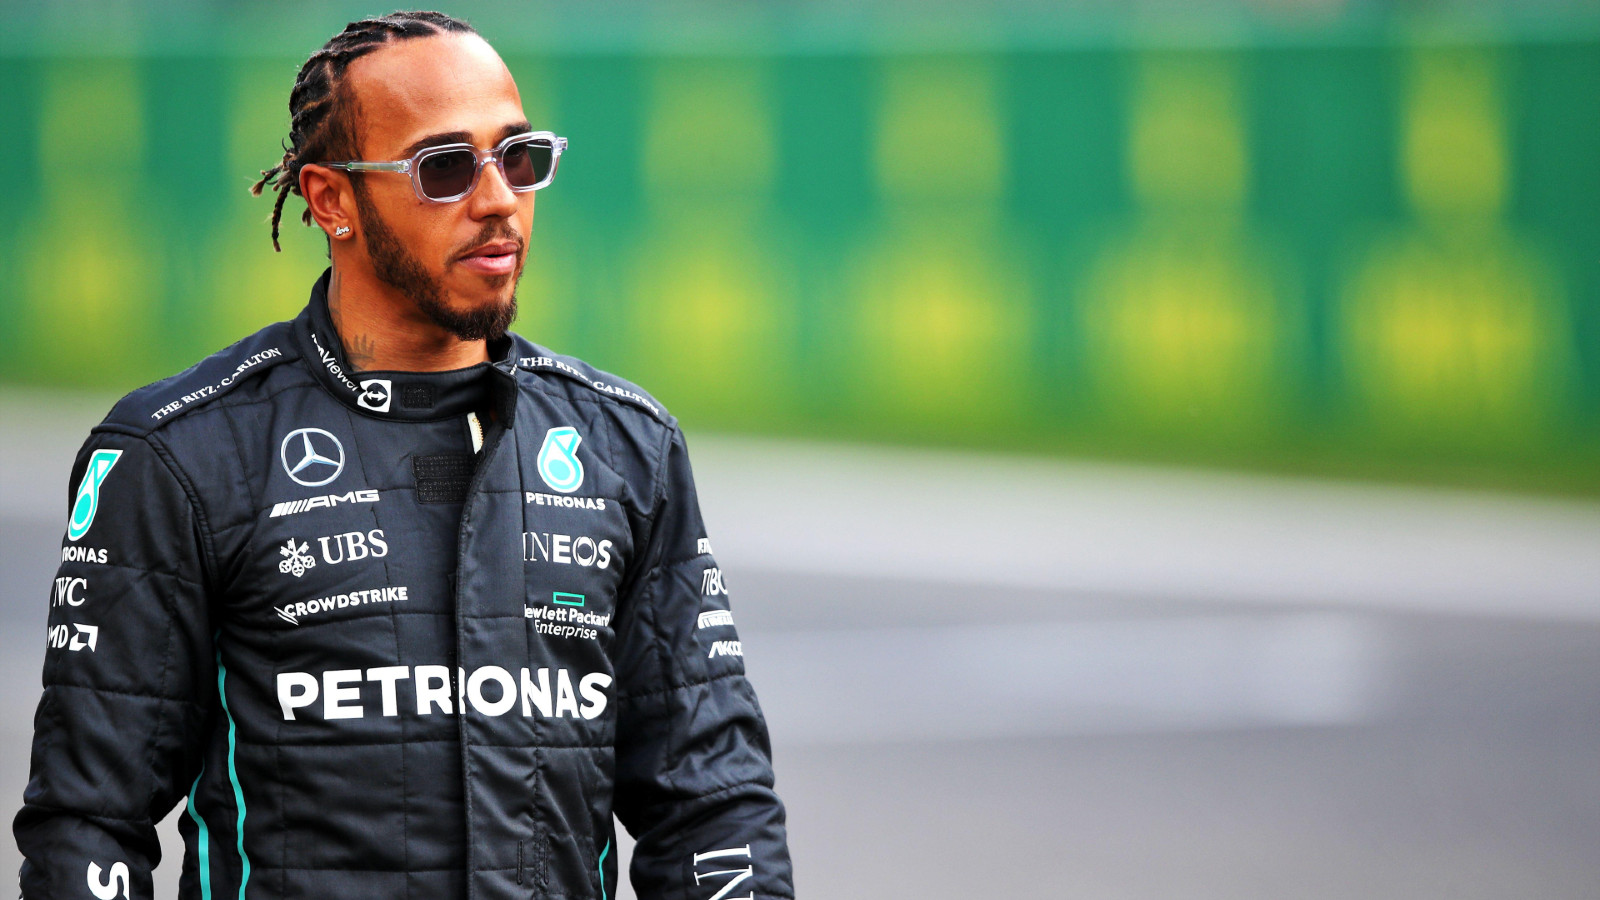 Mercedes' Lewis Hamilton attends media day at the Belgian Grand Prix. Spa-Francorchamps, August 2022.